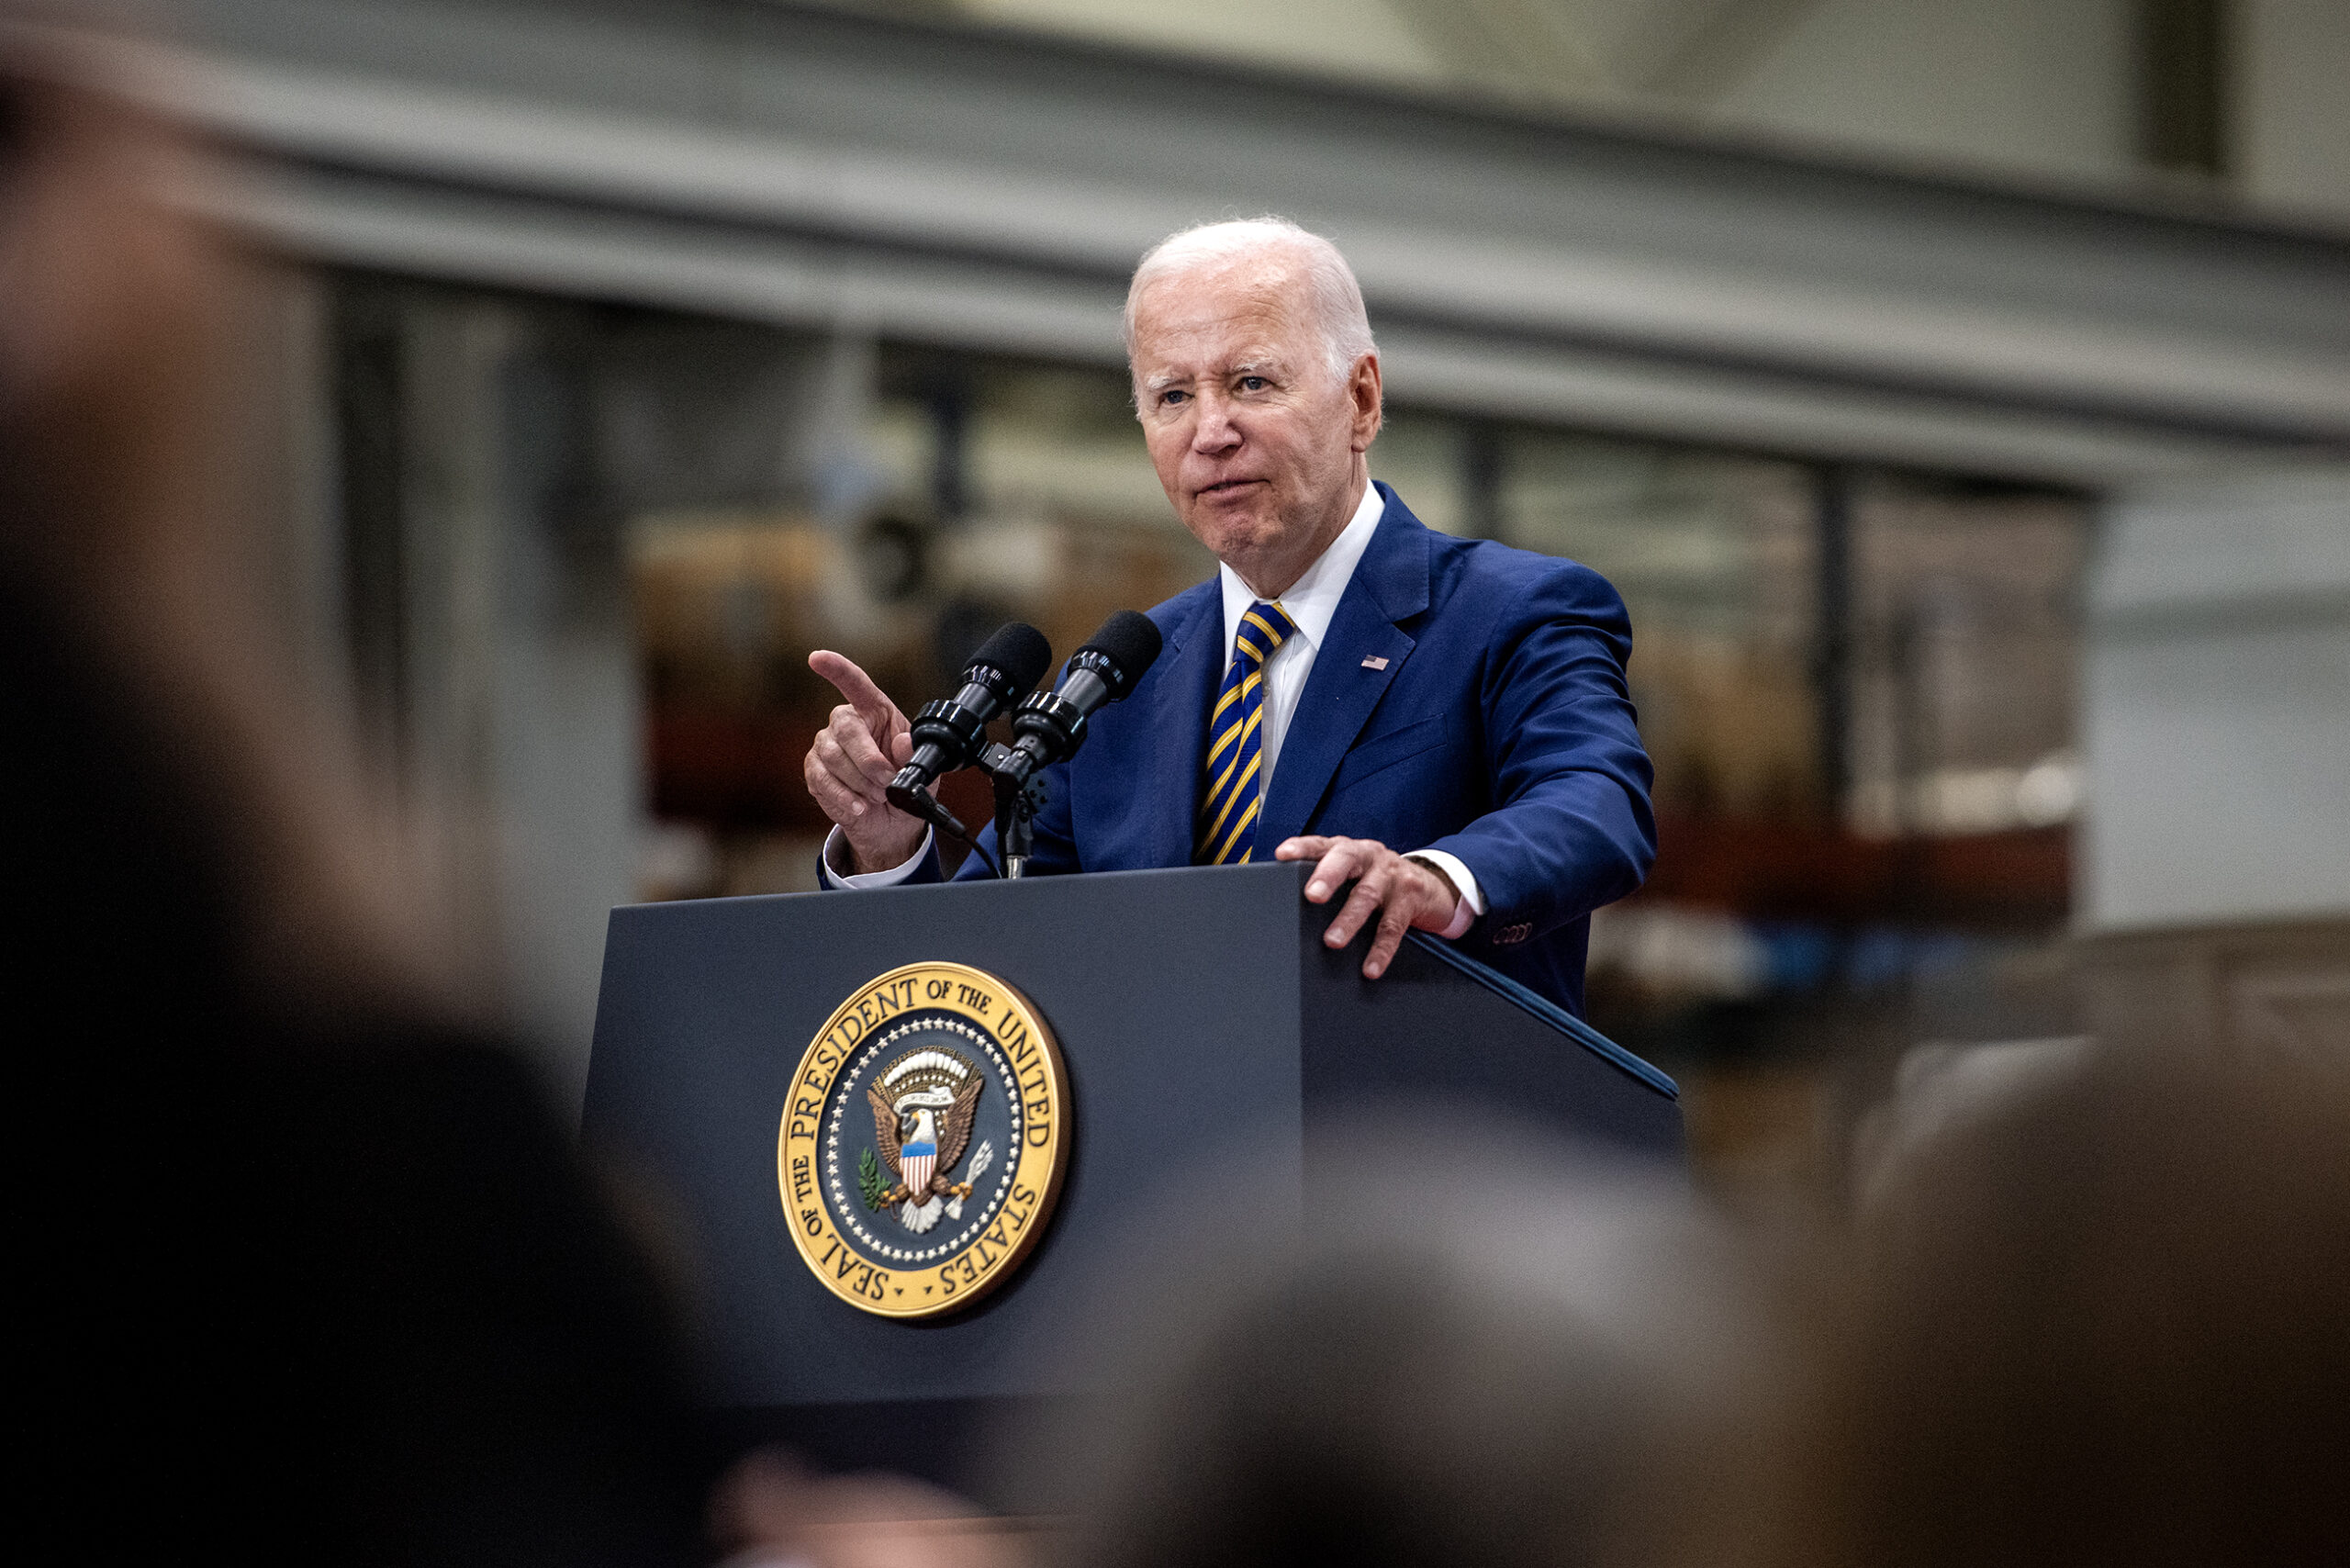 President Biden can be seen above the heads of attendees as he speaks at a podium.